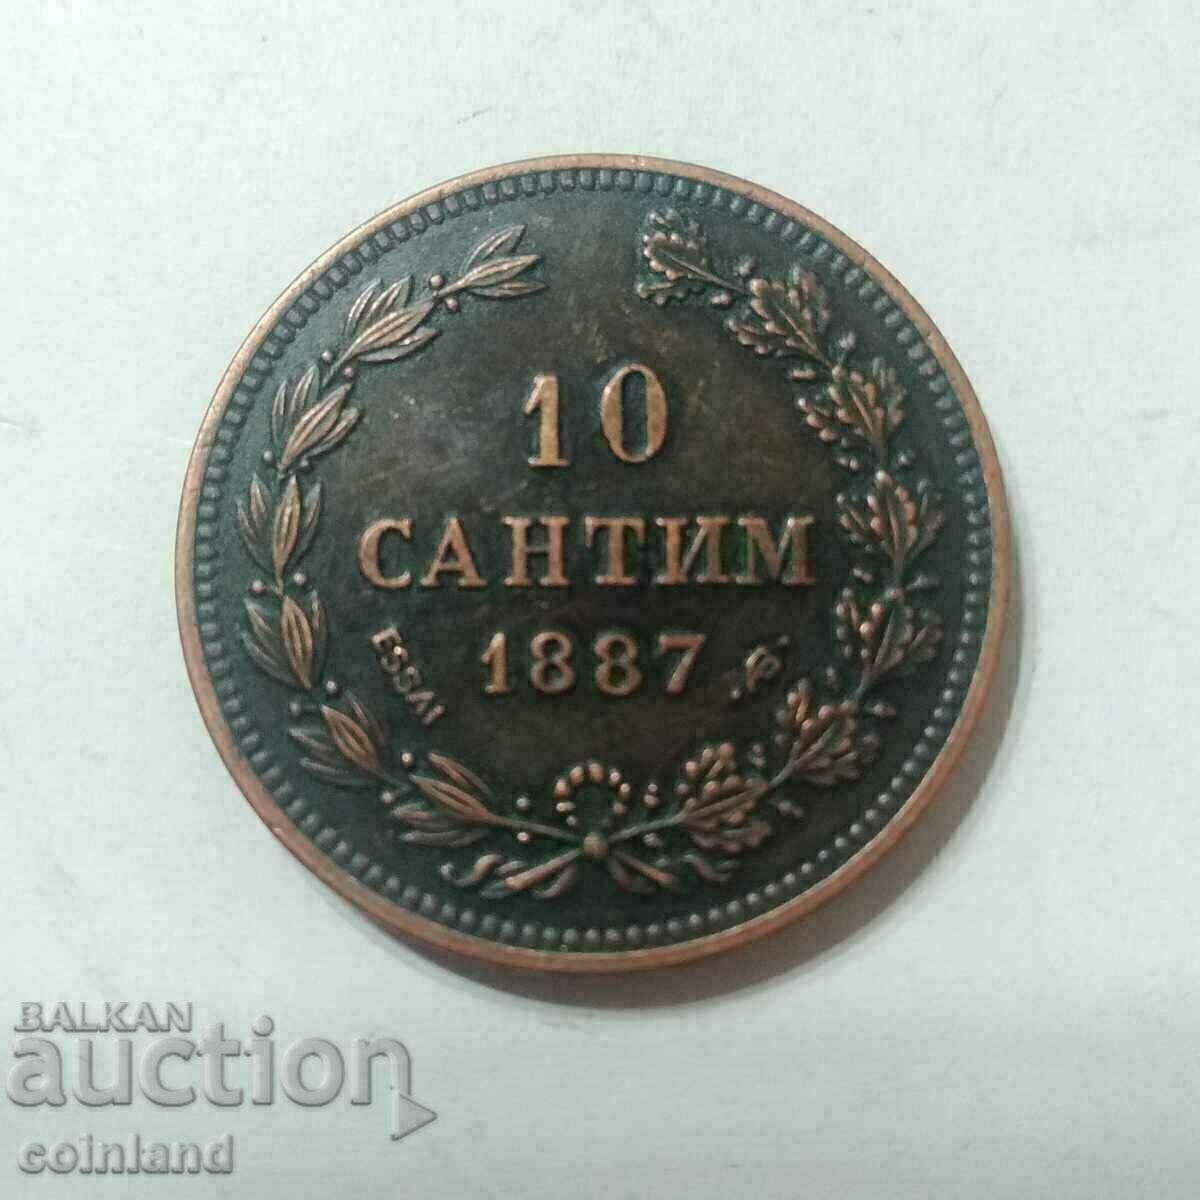 10 cents 1887 - REPLICA REPRODUCTION